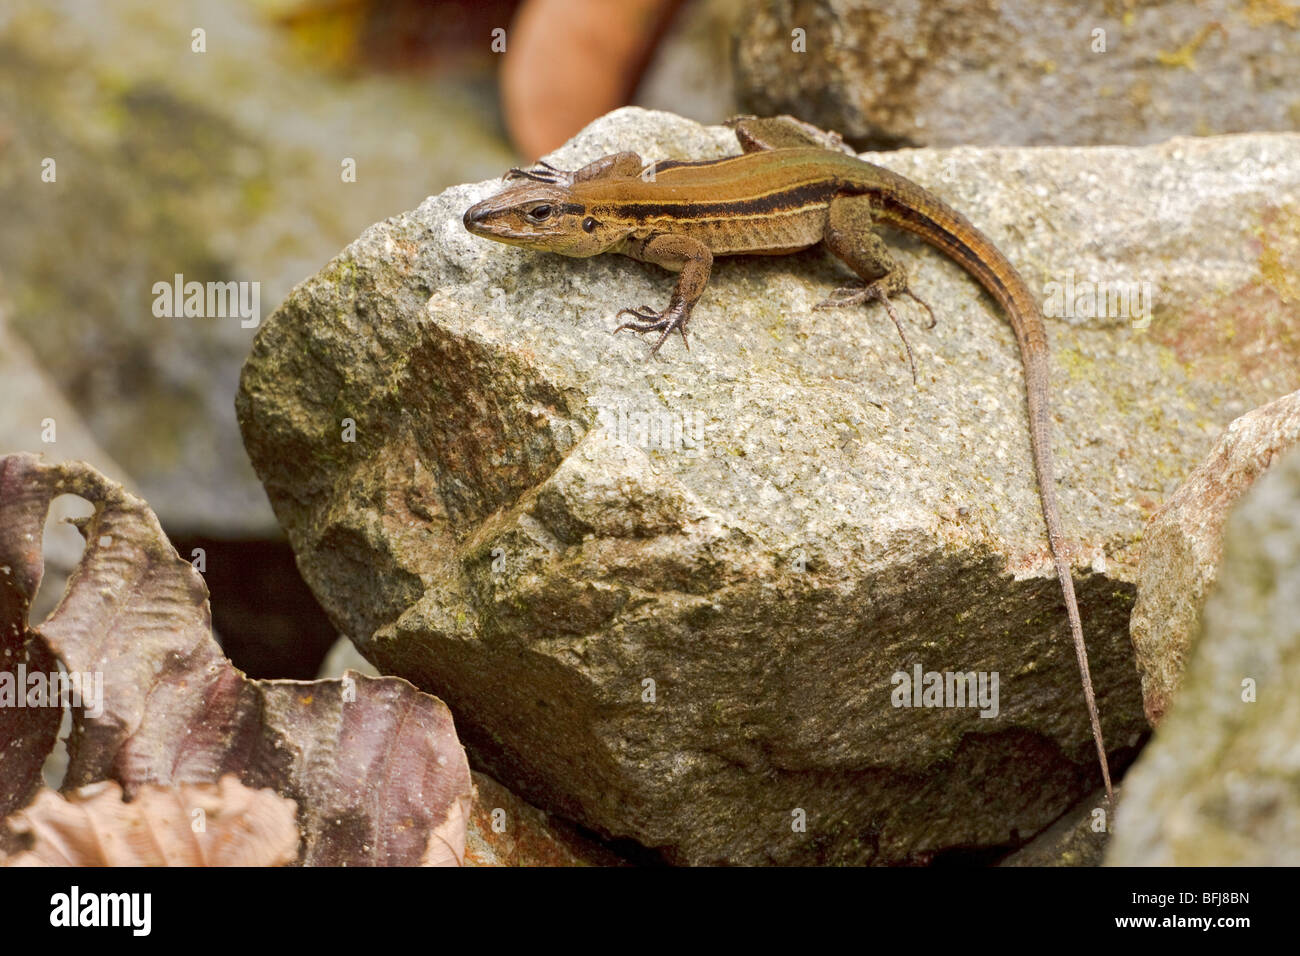 A lizard perched on a rock in the Milpe reserve in northwest Ecuador. Stock Photo